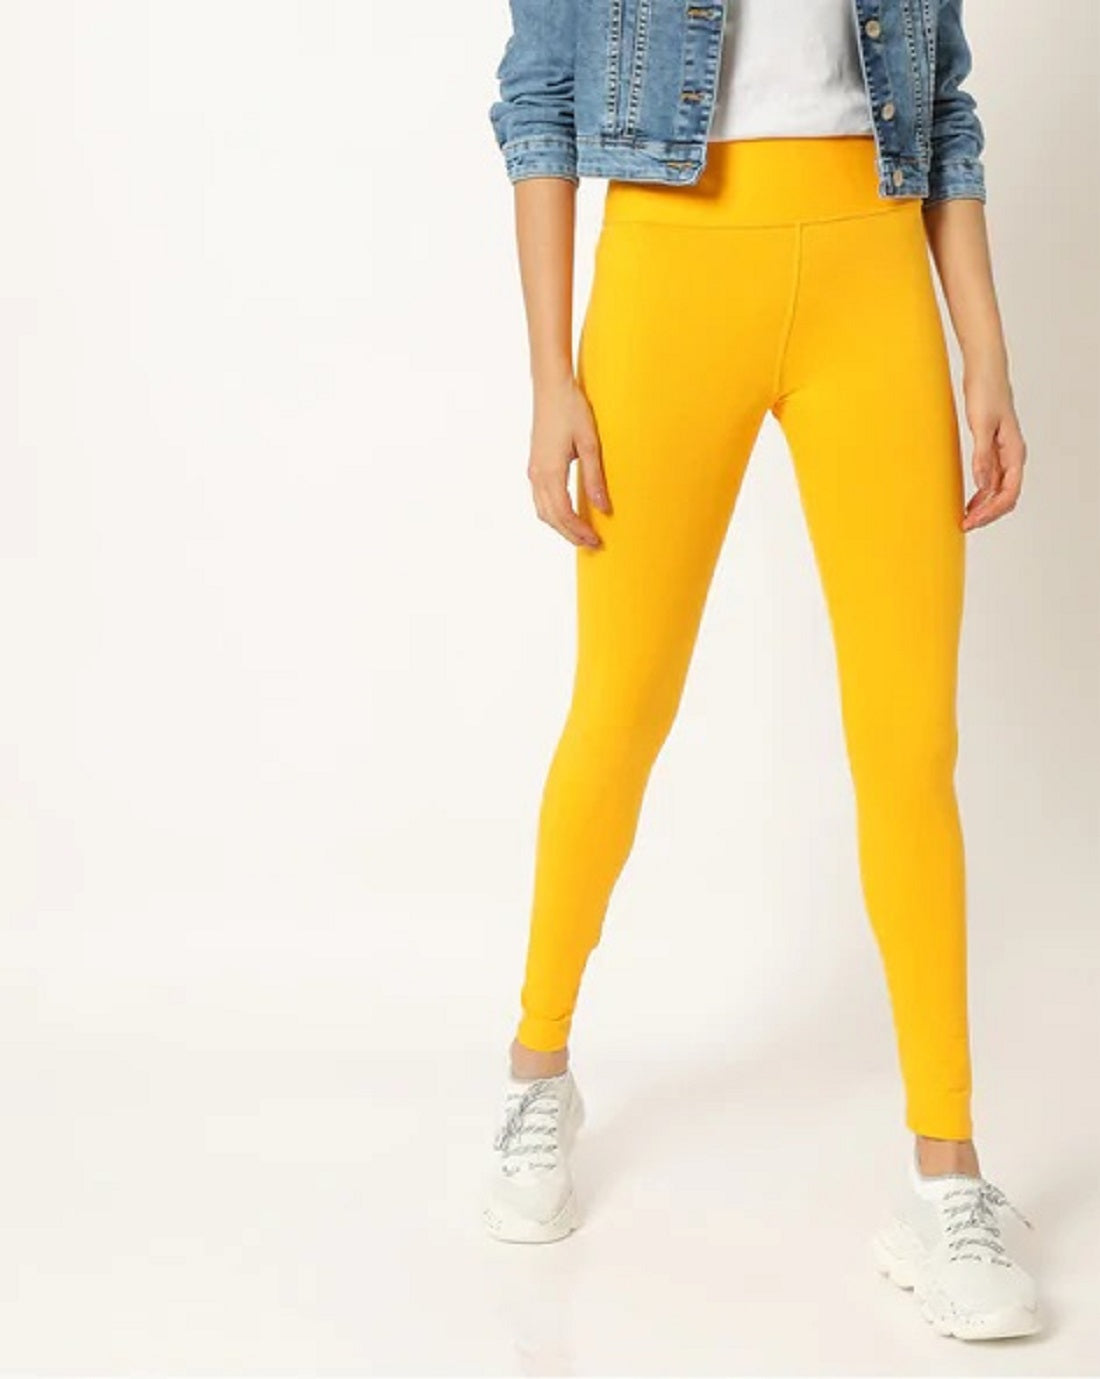 Colorfulkoala Yellow High Waisted Leggings Size XS - $18 - From Vintage